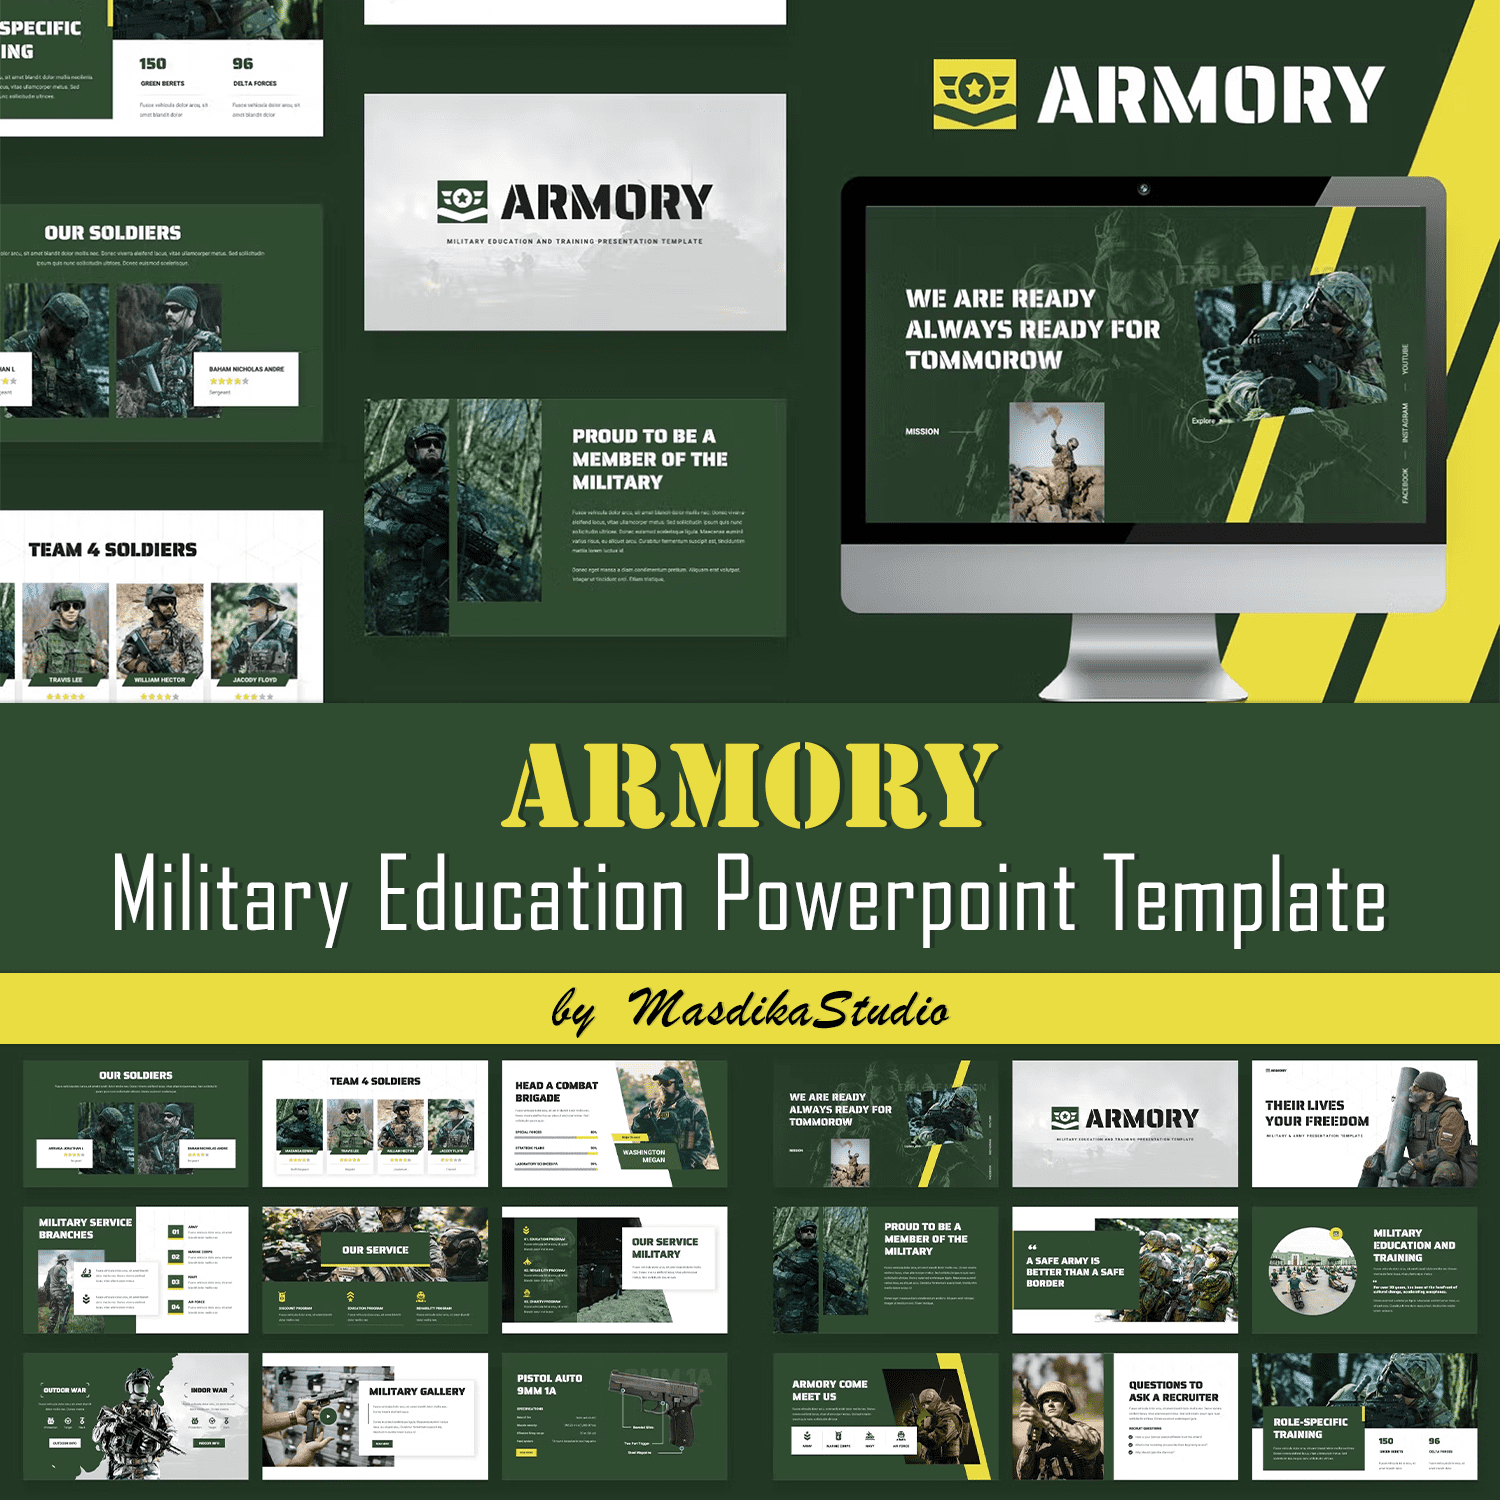 Armory - Military Education Powerpoint Template.